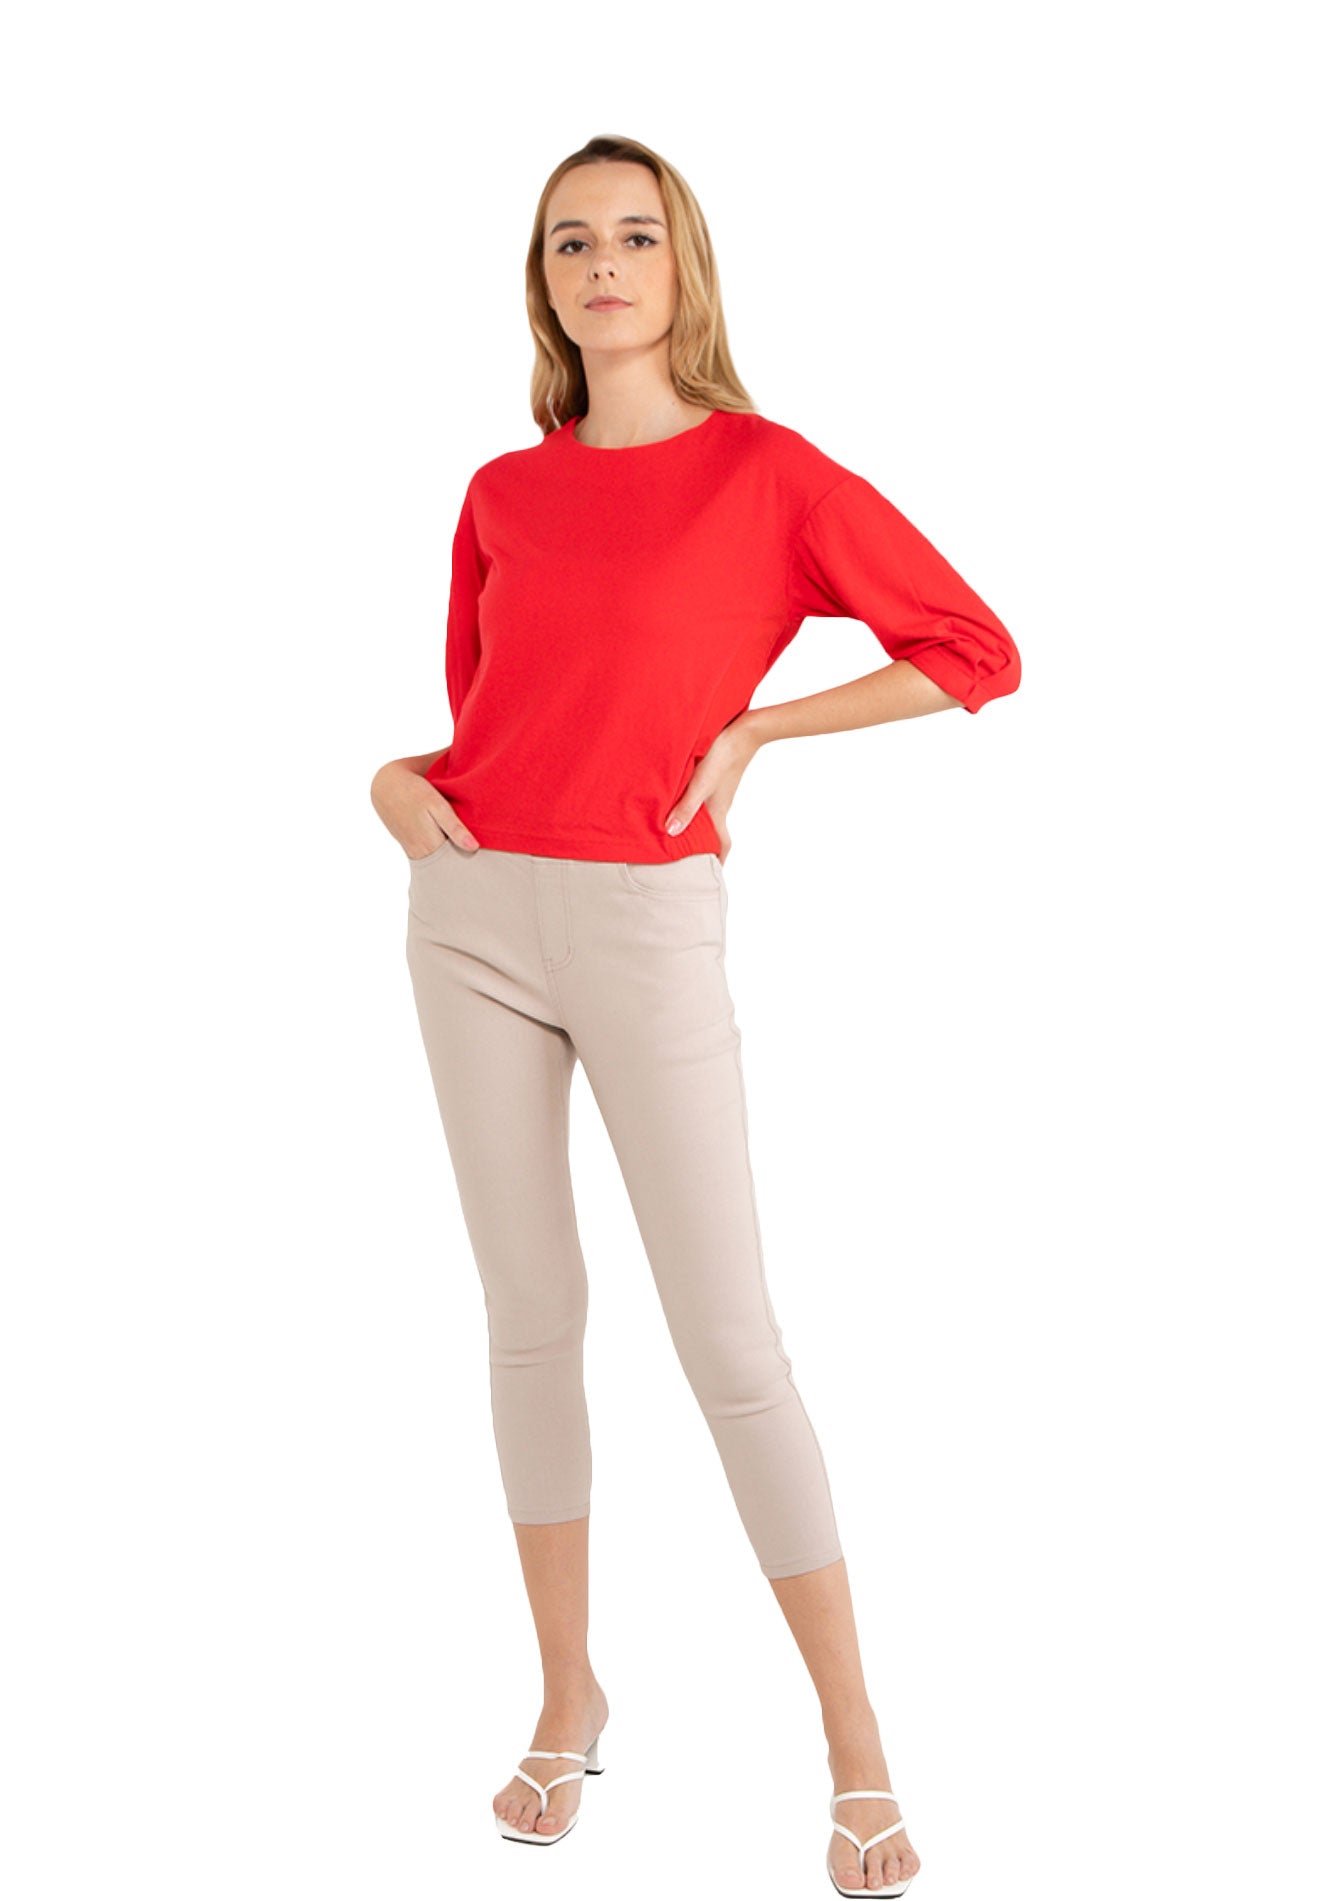 VOIR JEANS Round Neck Long Sleeves Top